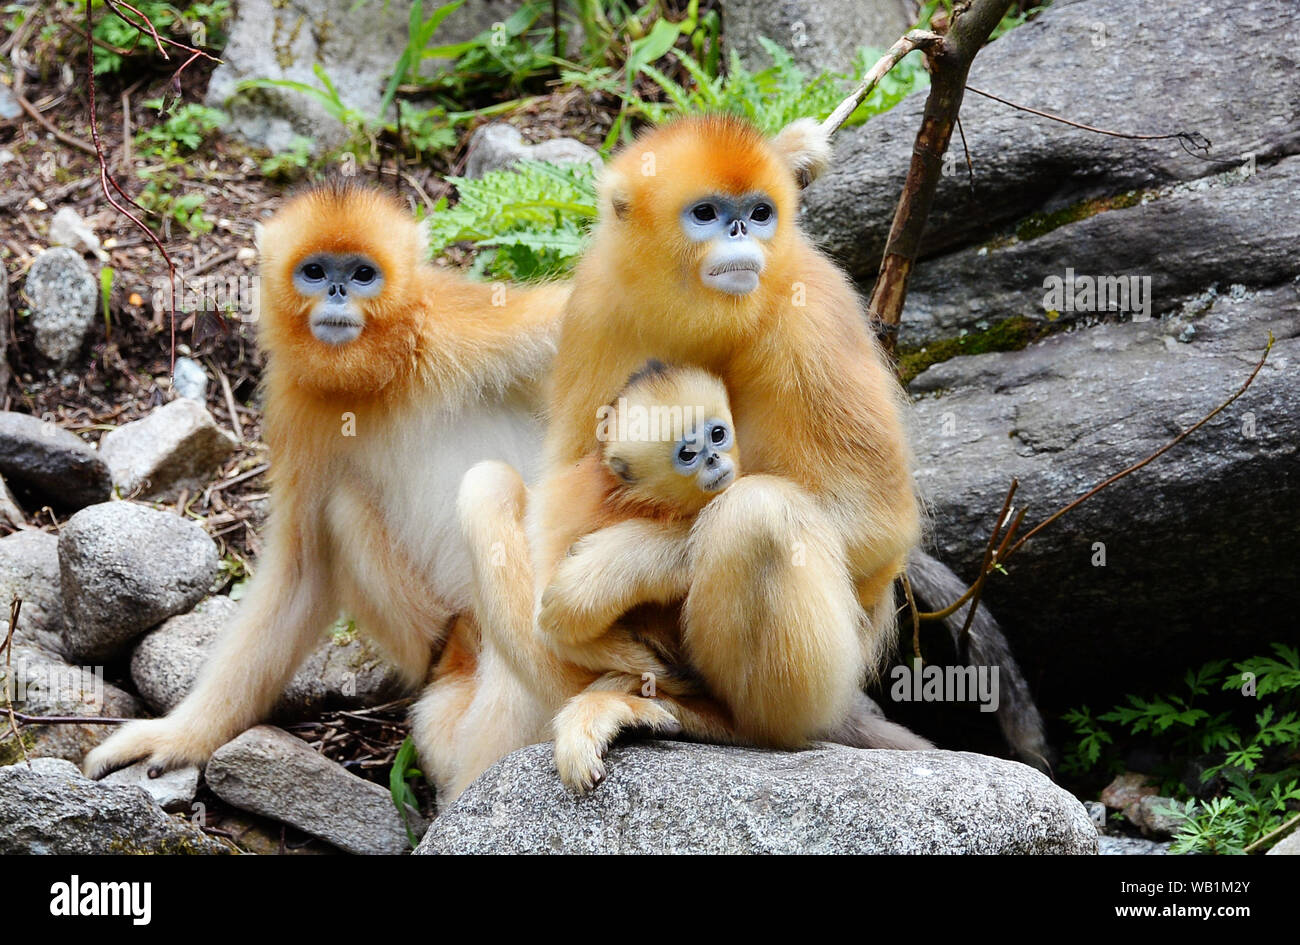 190823) -- BEIJING, Aug. 23, 2019 (Xinhua) -- Golden monkeys rest in the  giant panda valley of the Qinling Mountain in Foping County, northwest  China's Shaanxi Province, Aug. 3, 2018. As a